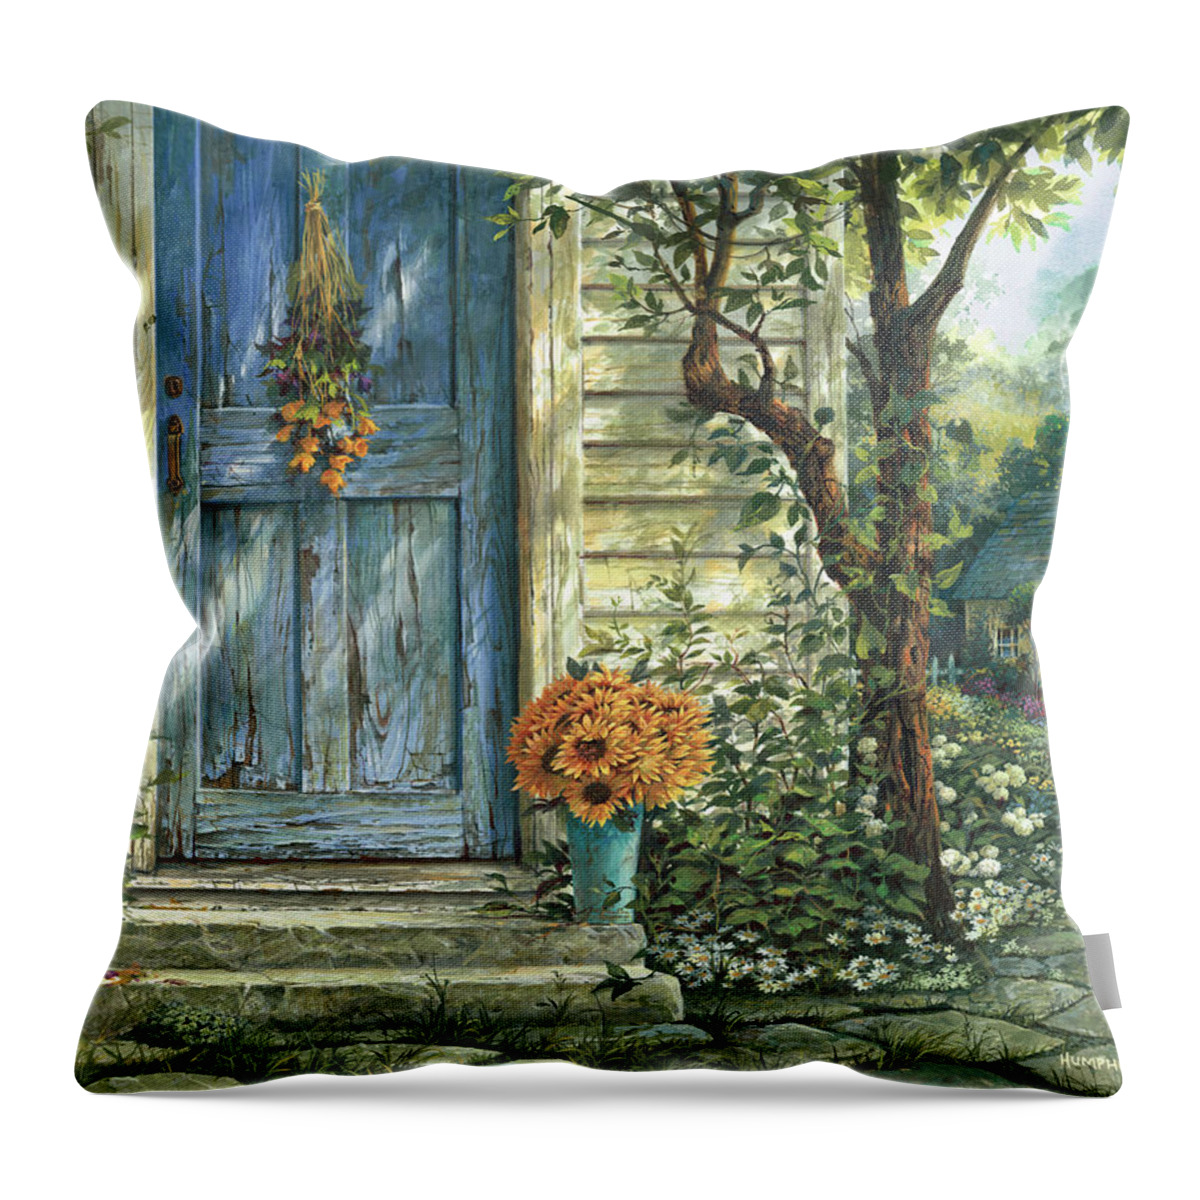 Michael Humphries Throw Pillow featuring the painting Sunflowers by Michael Humphries